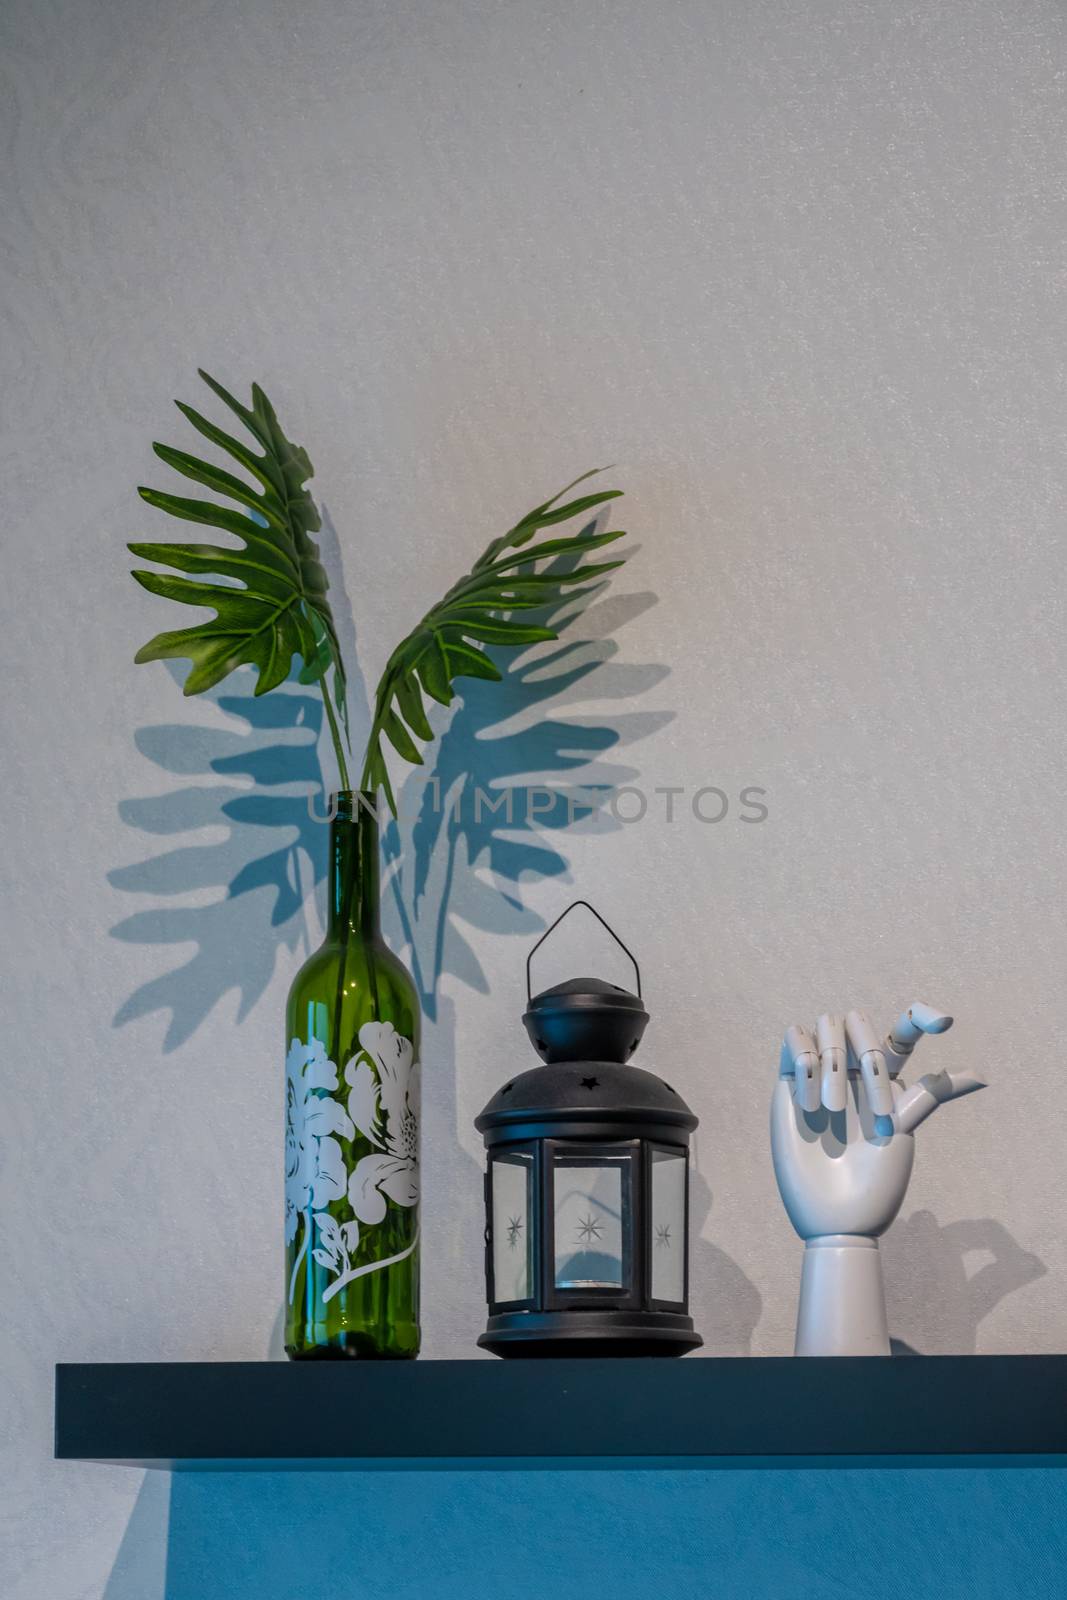 Room decoration modern style glass bottle, hand and leaves